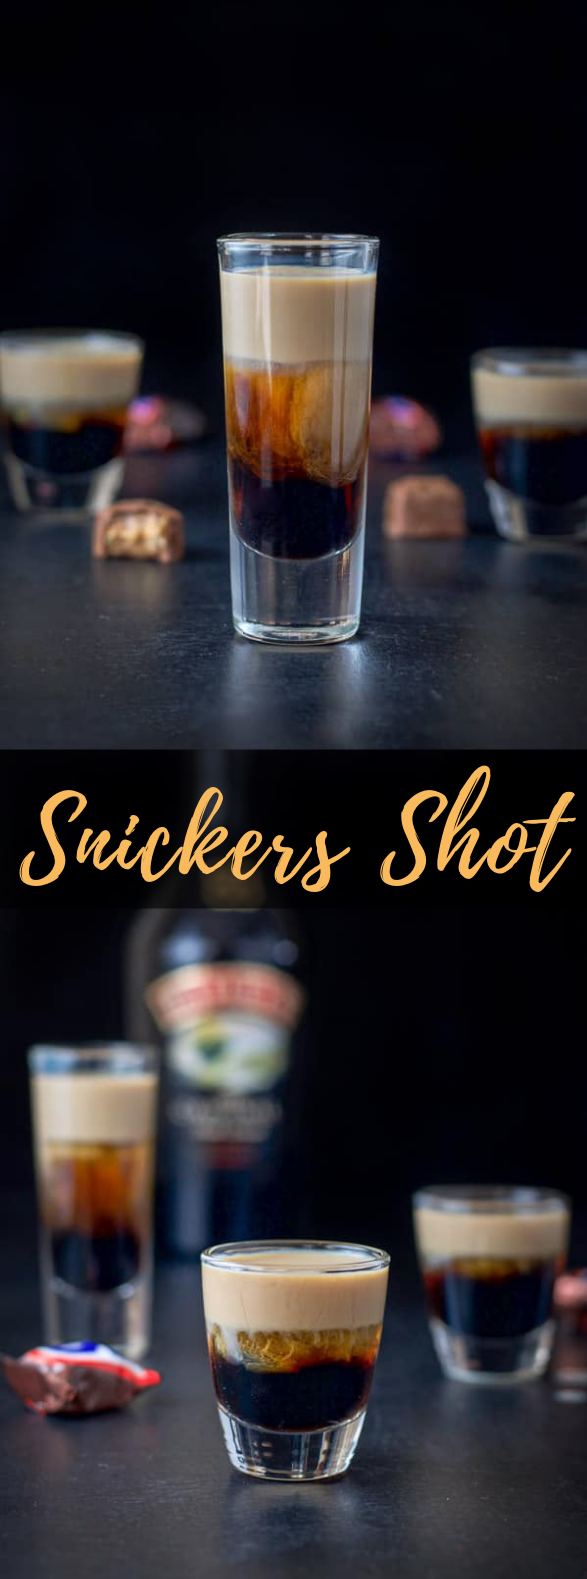 SNICKERS SHOT | STORM CLOUDS IN A GLASS #cocktails #candybar